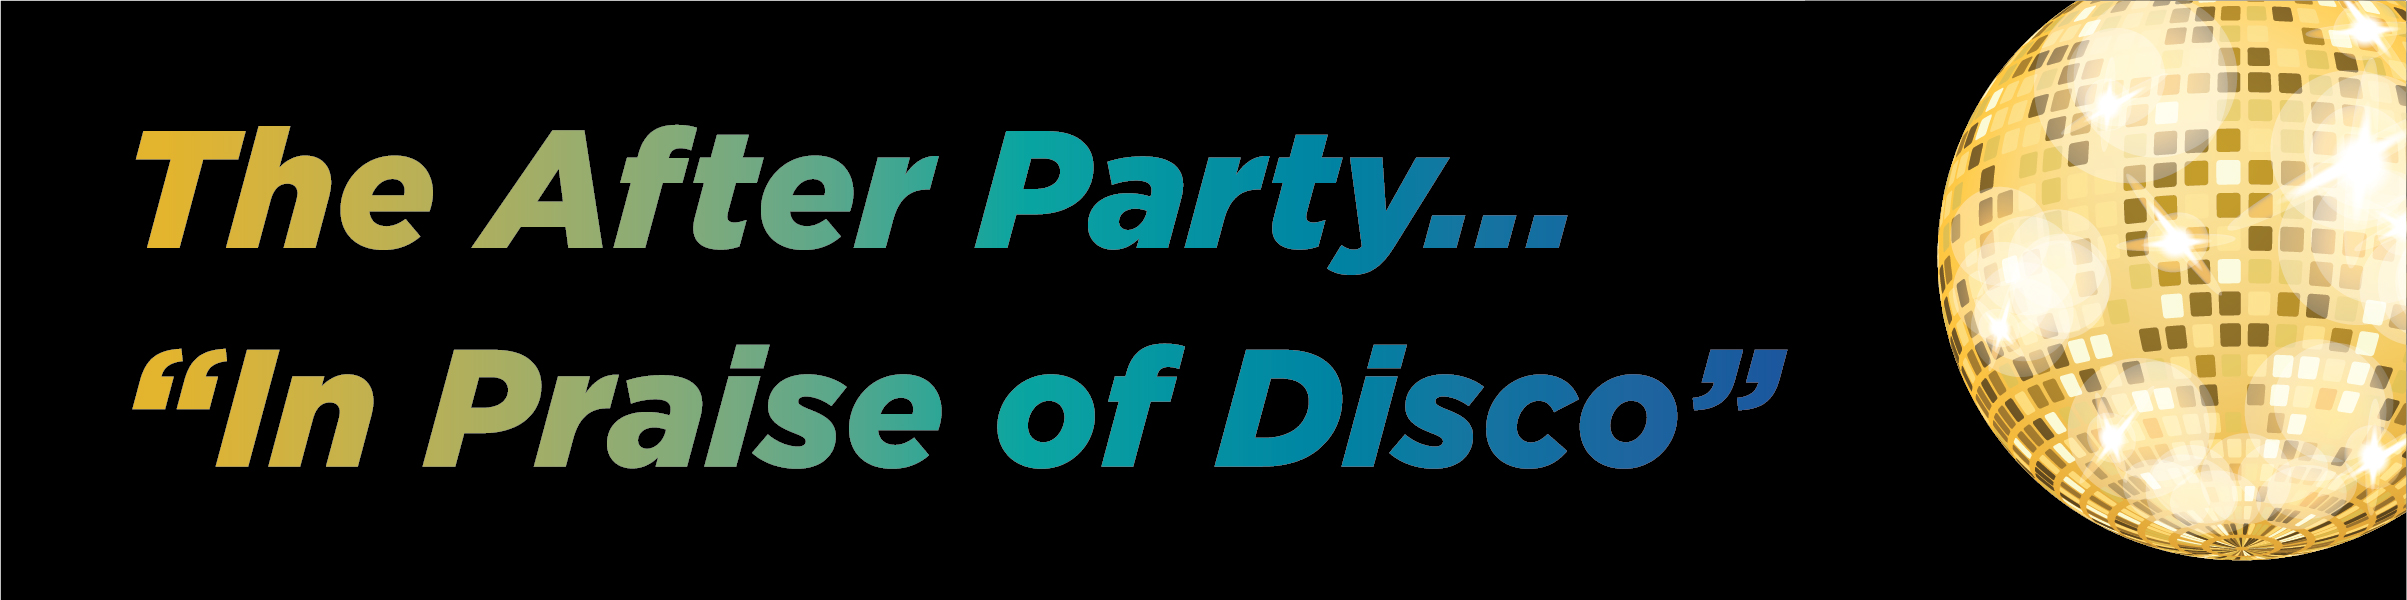 The After Party..."In Praise of Disco" Banner Graphic